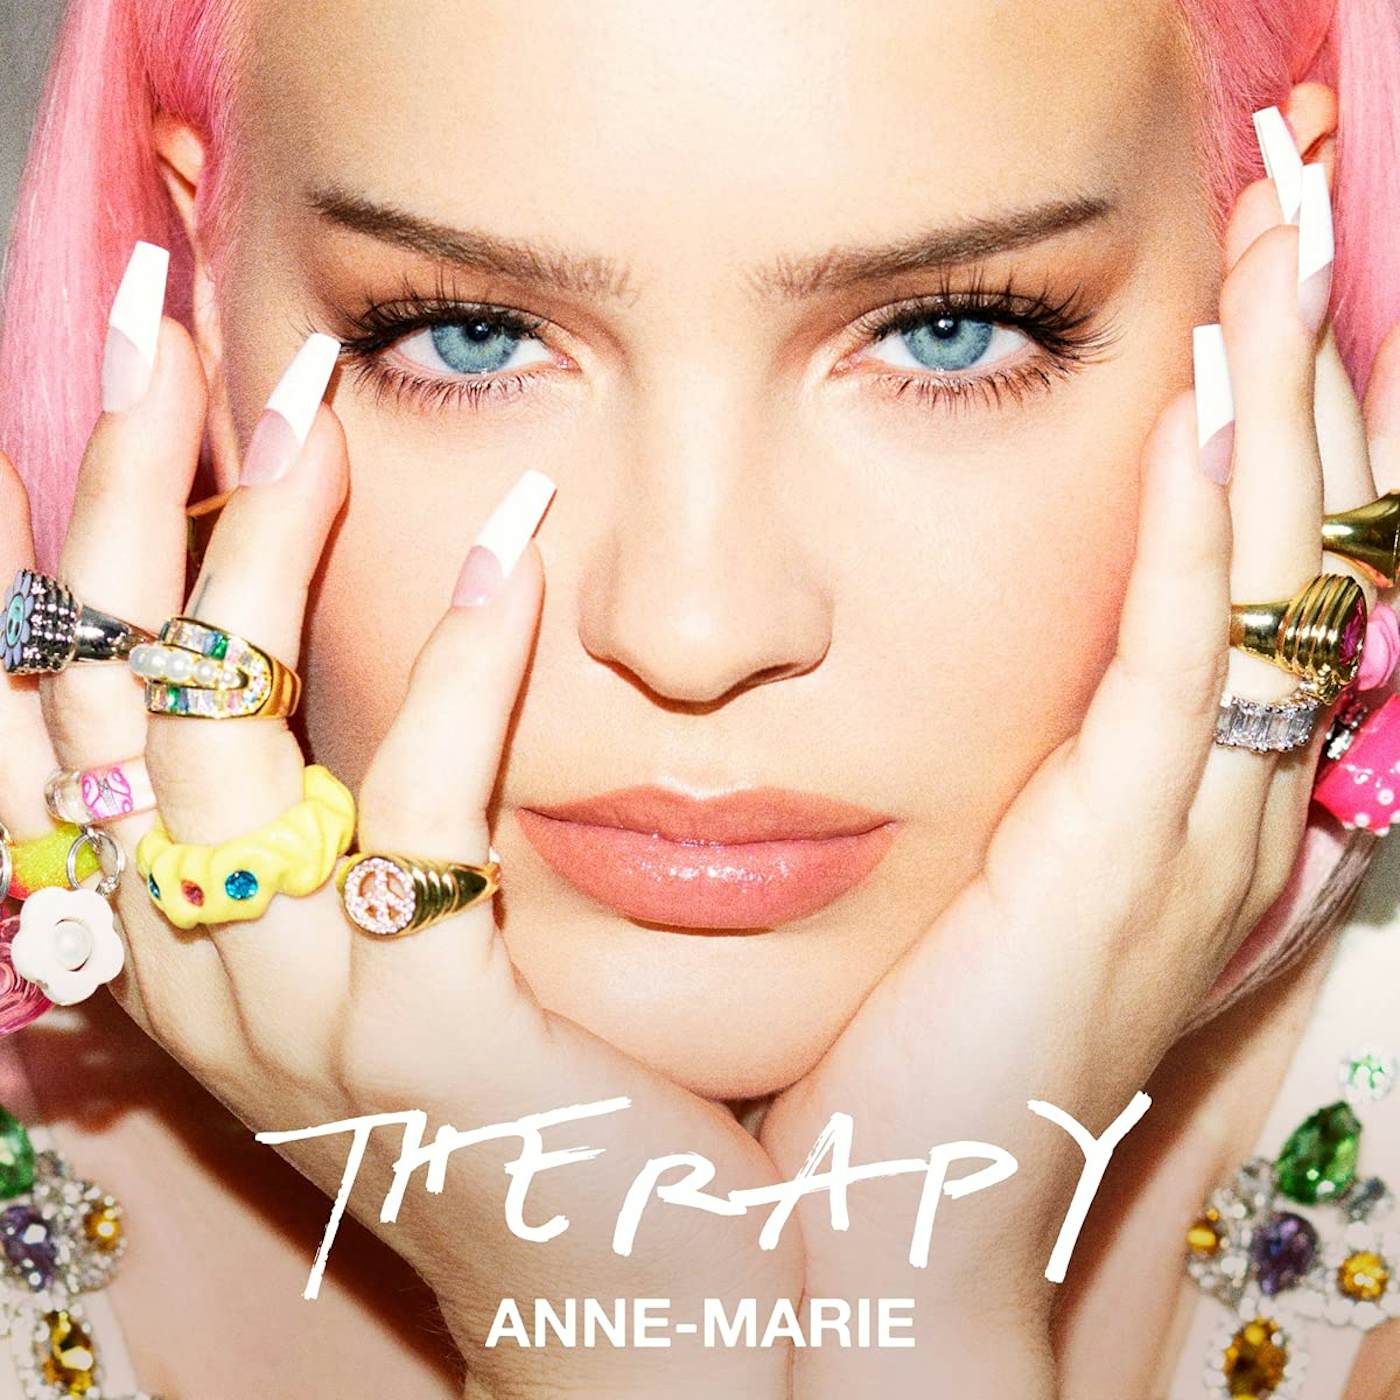 Anne-Marie Therapy Vinyl Record